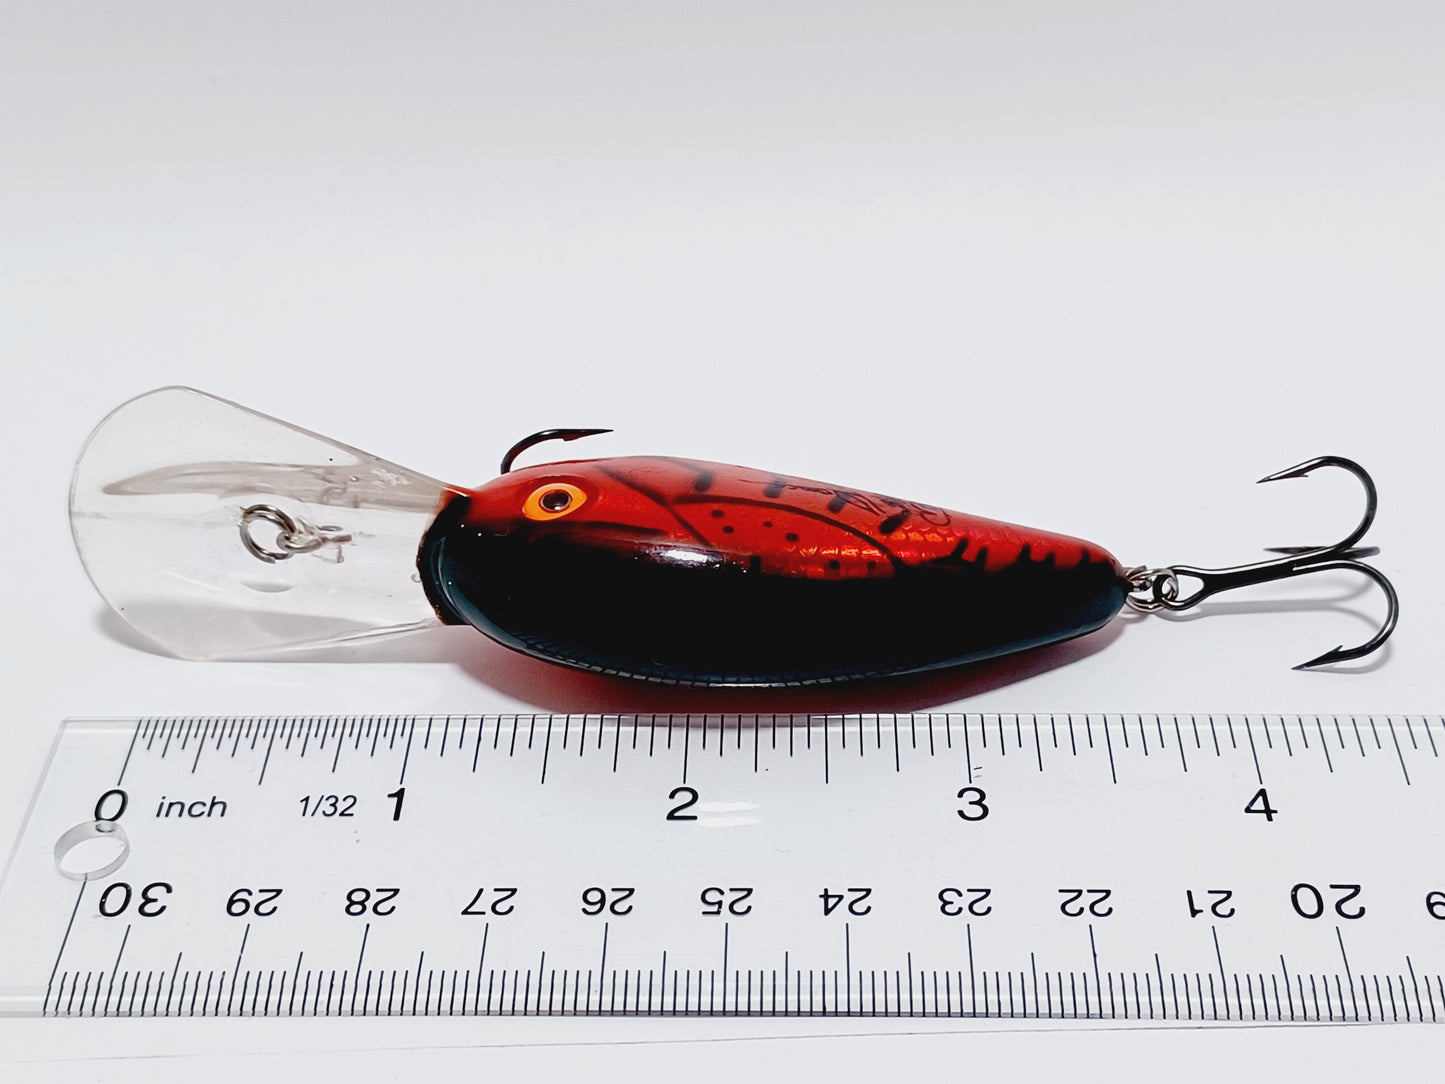 Classic Bill Dance Suspending Fat Free Shad (Holographic Red Craw) Rattling crankbait diving lure